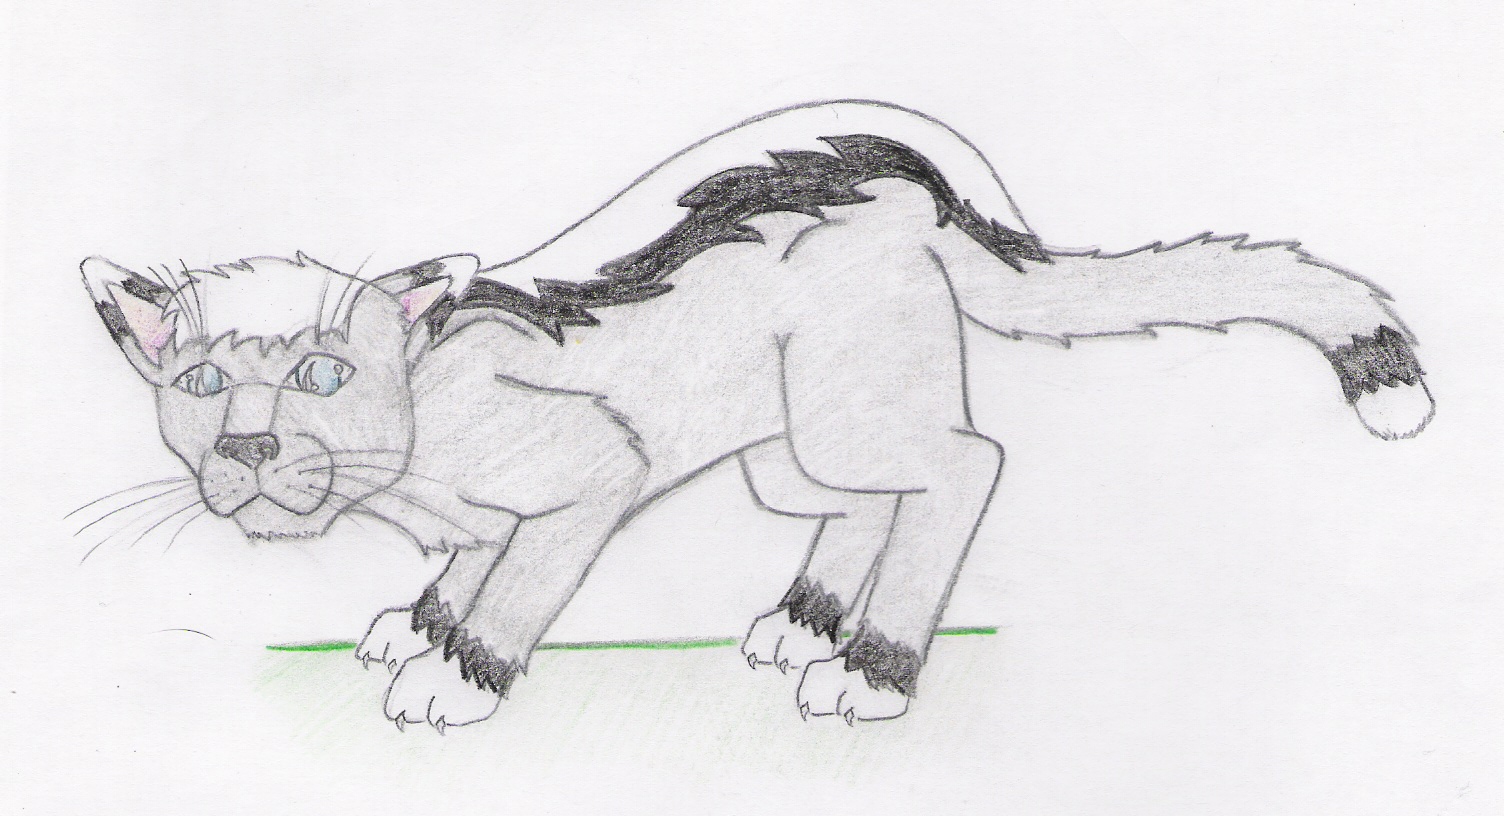 Badgerstripe-Getting ready to pounce by Nightwhisper350